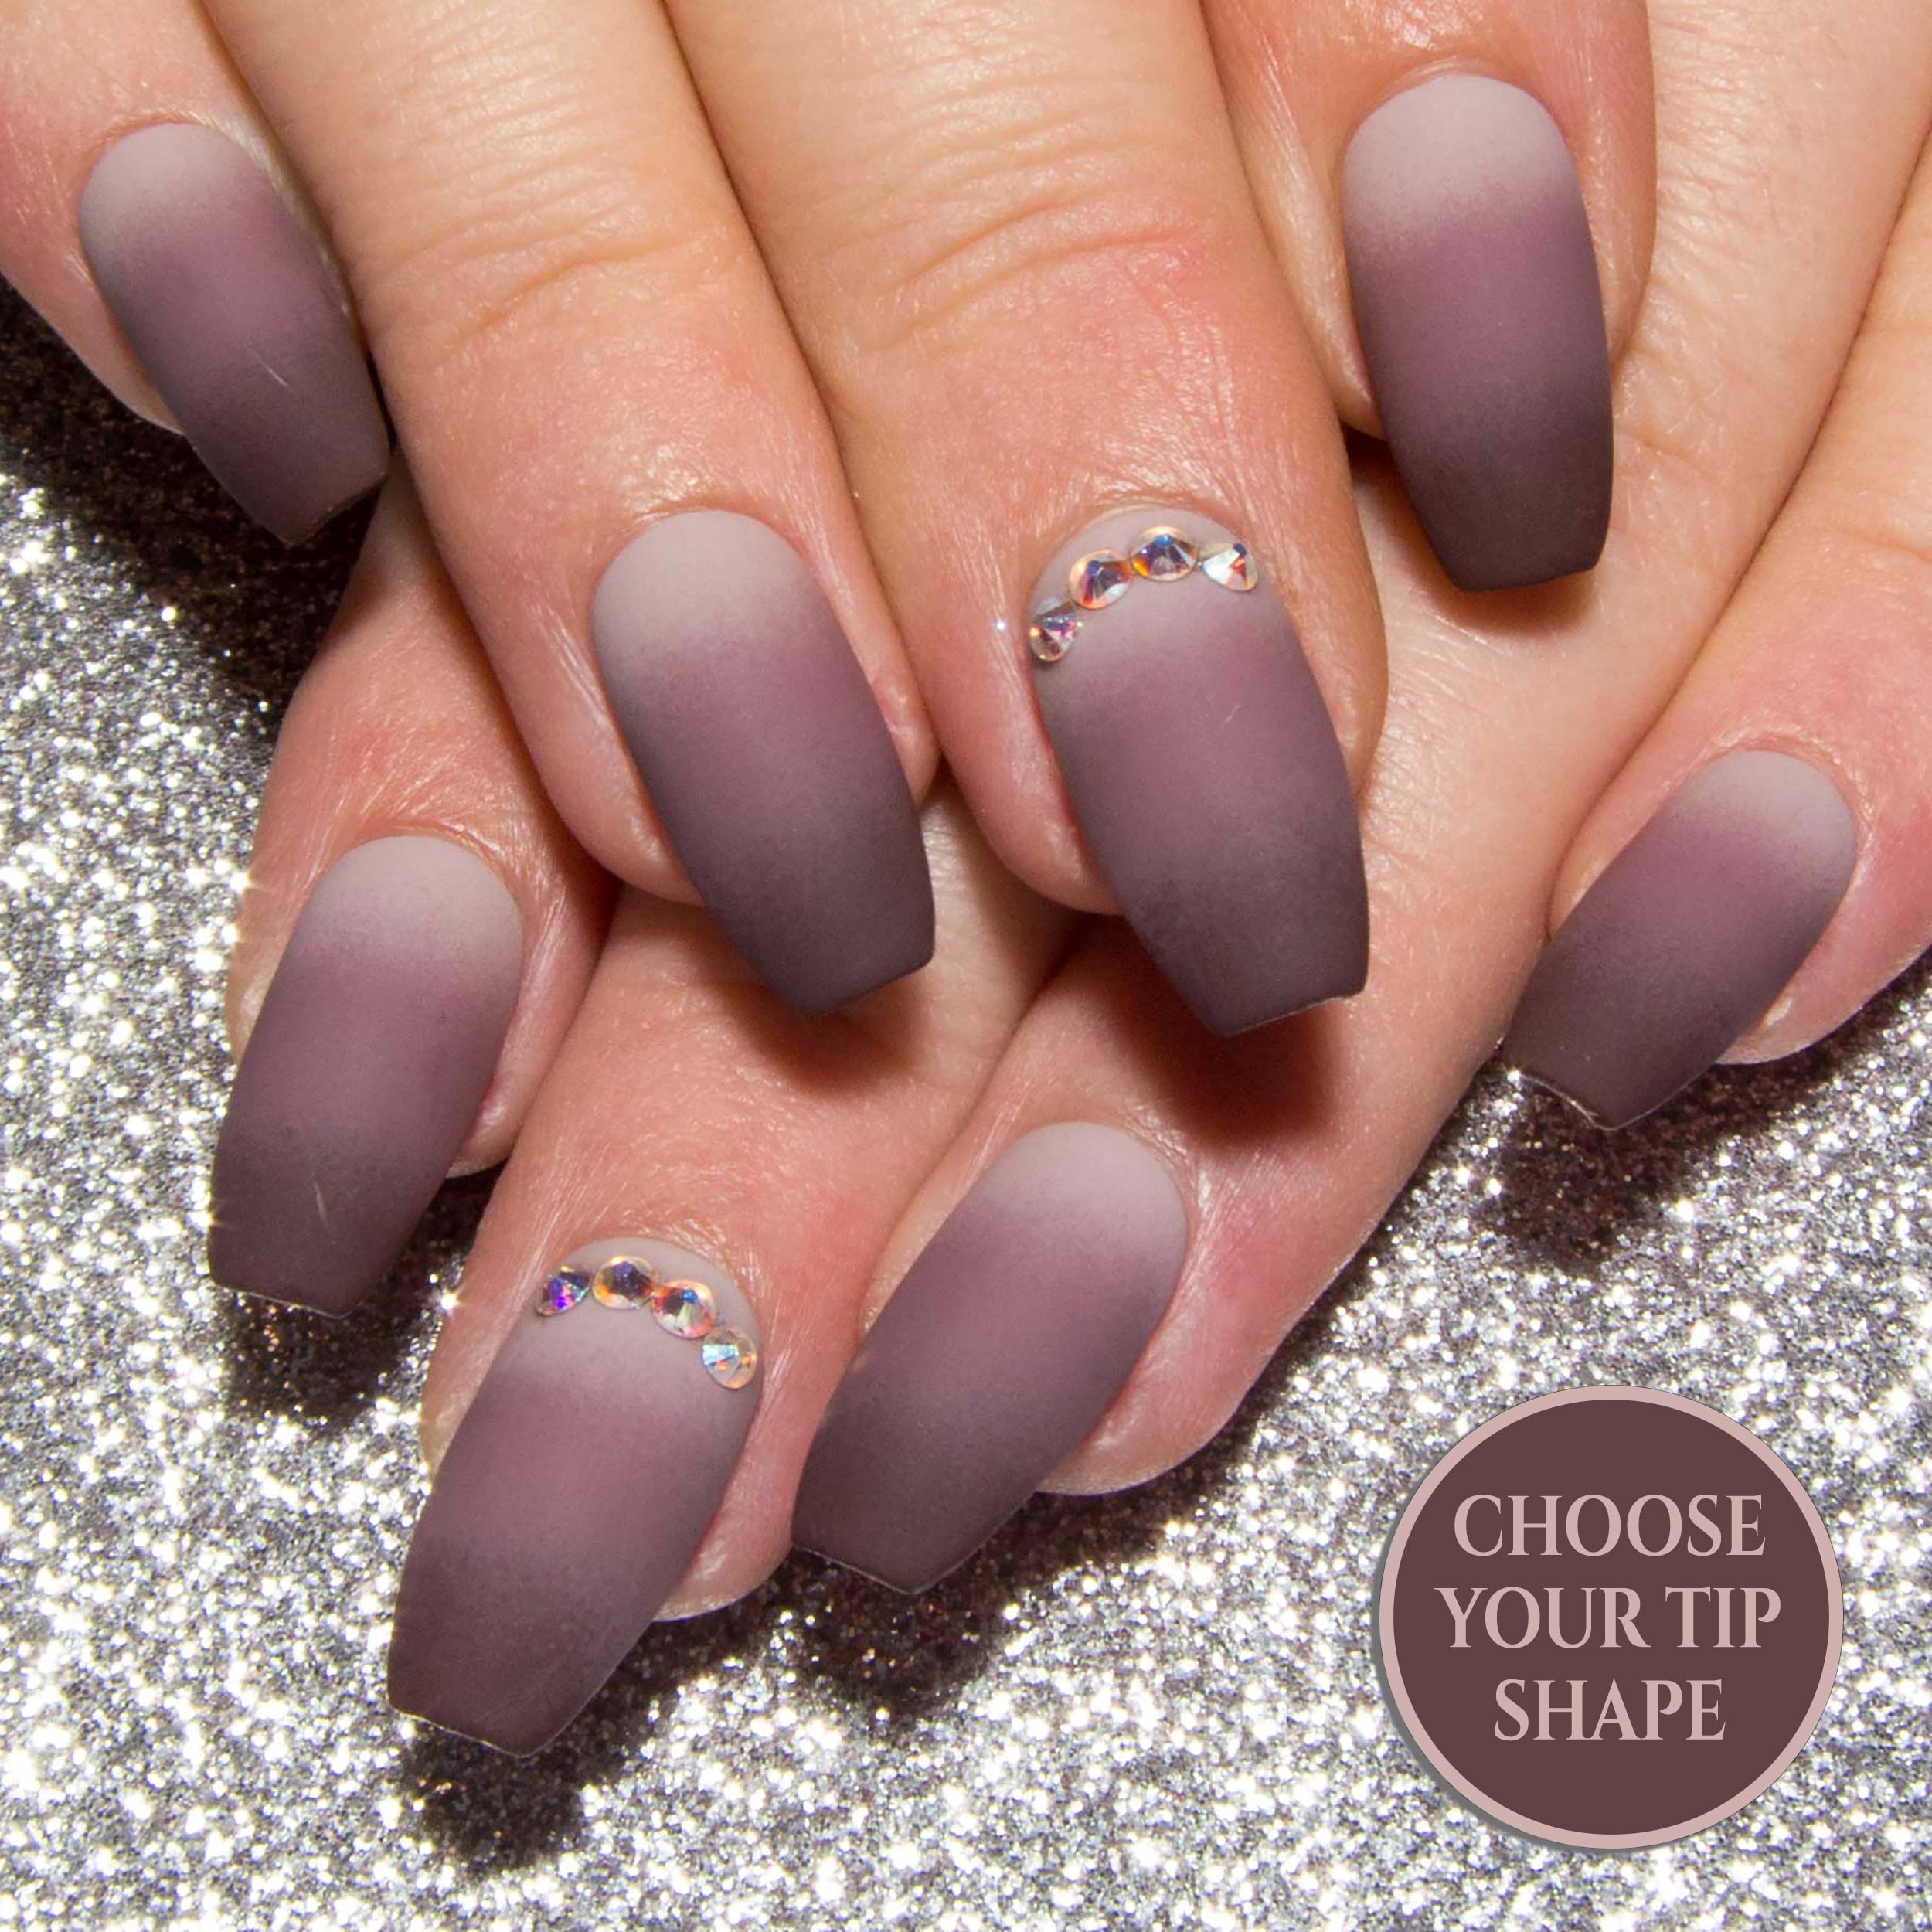 Nudist Matte Or Gloss Neutral Ombre Nails With Ab Swarovski Crystals